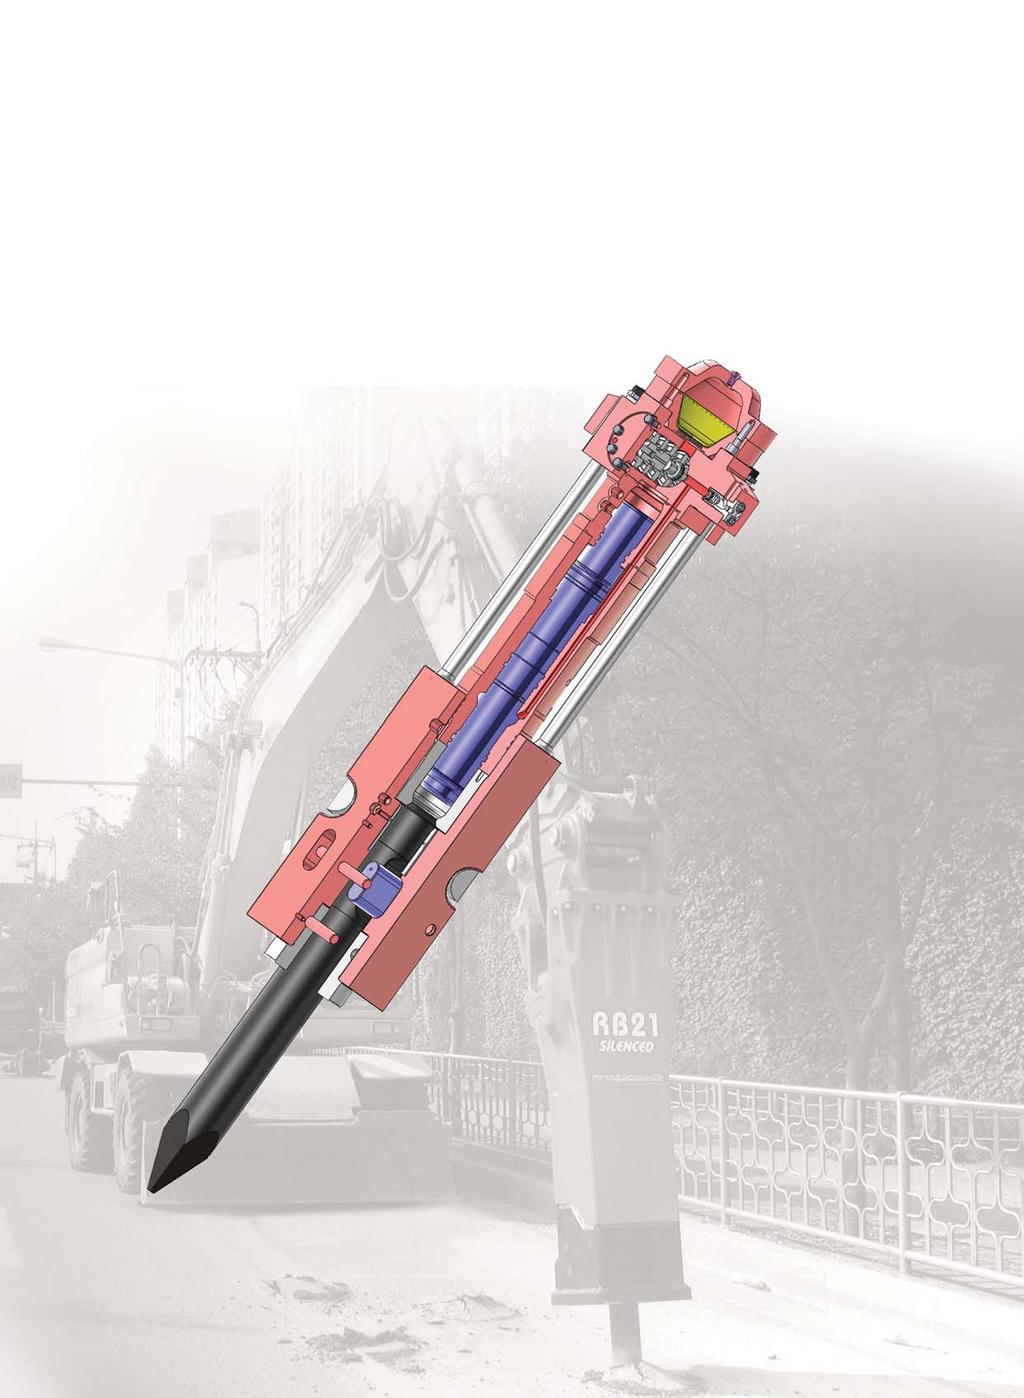 JAB Hydraulic Breaker Cross-Section Diagram of RB Series Accumulator Ass y Membrane-type accumulators assist with power stroke and provide protection against hydraulic impact while the sealed